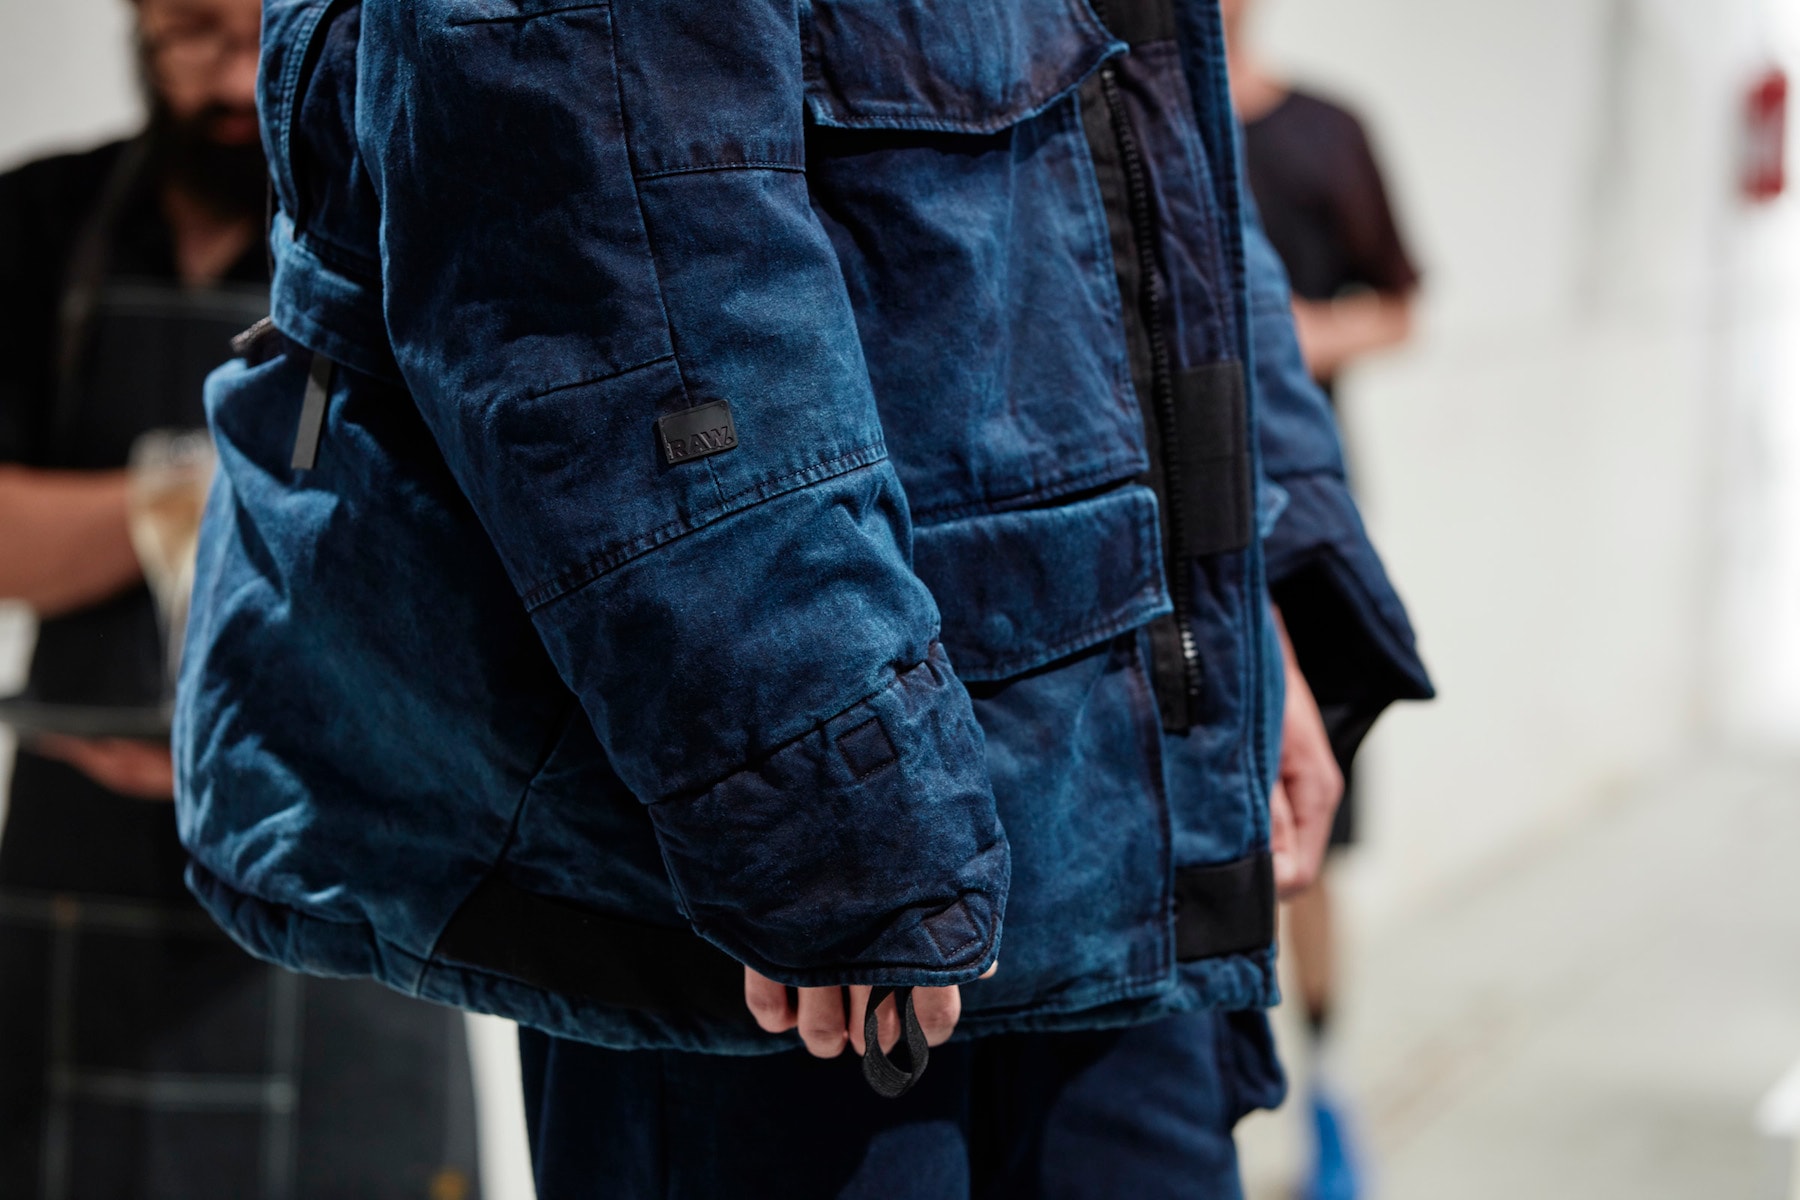 G-Star RAW Research by Aitor Throup 第三回正式登場